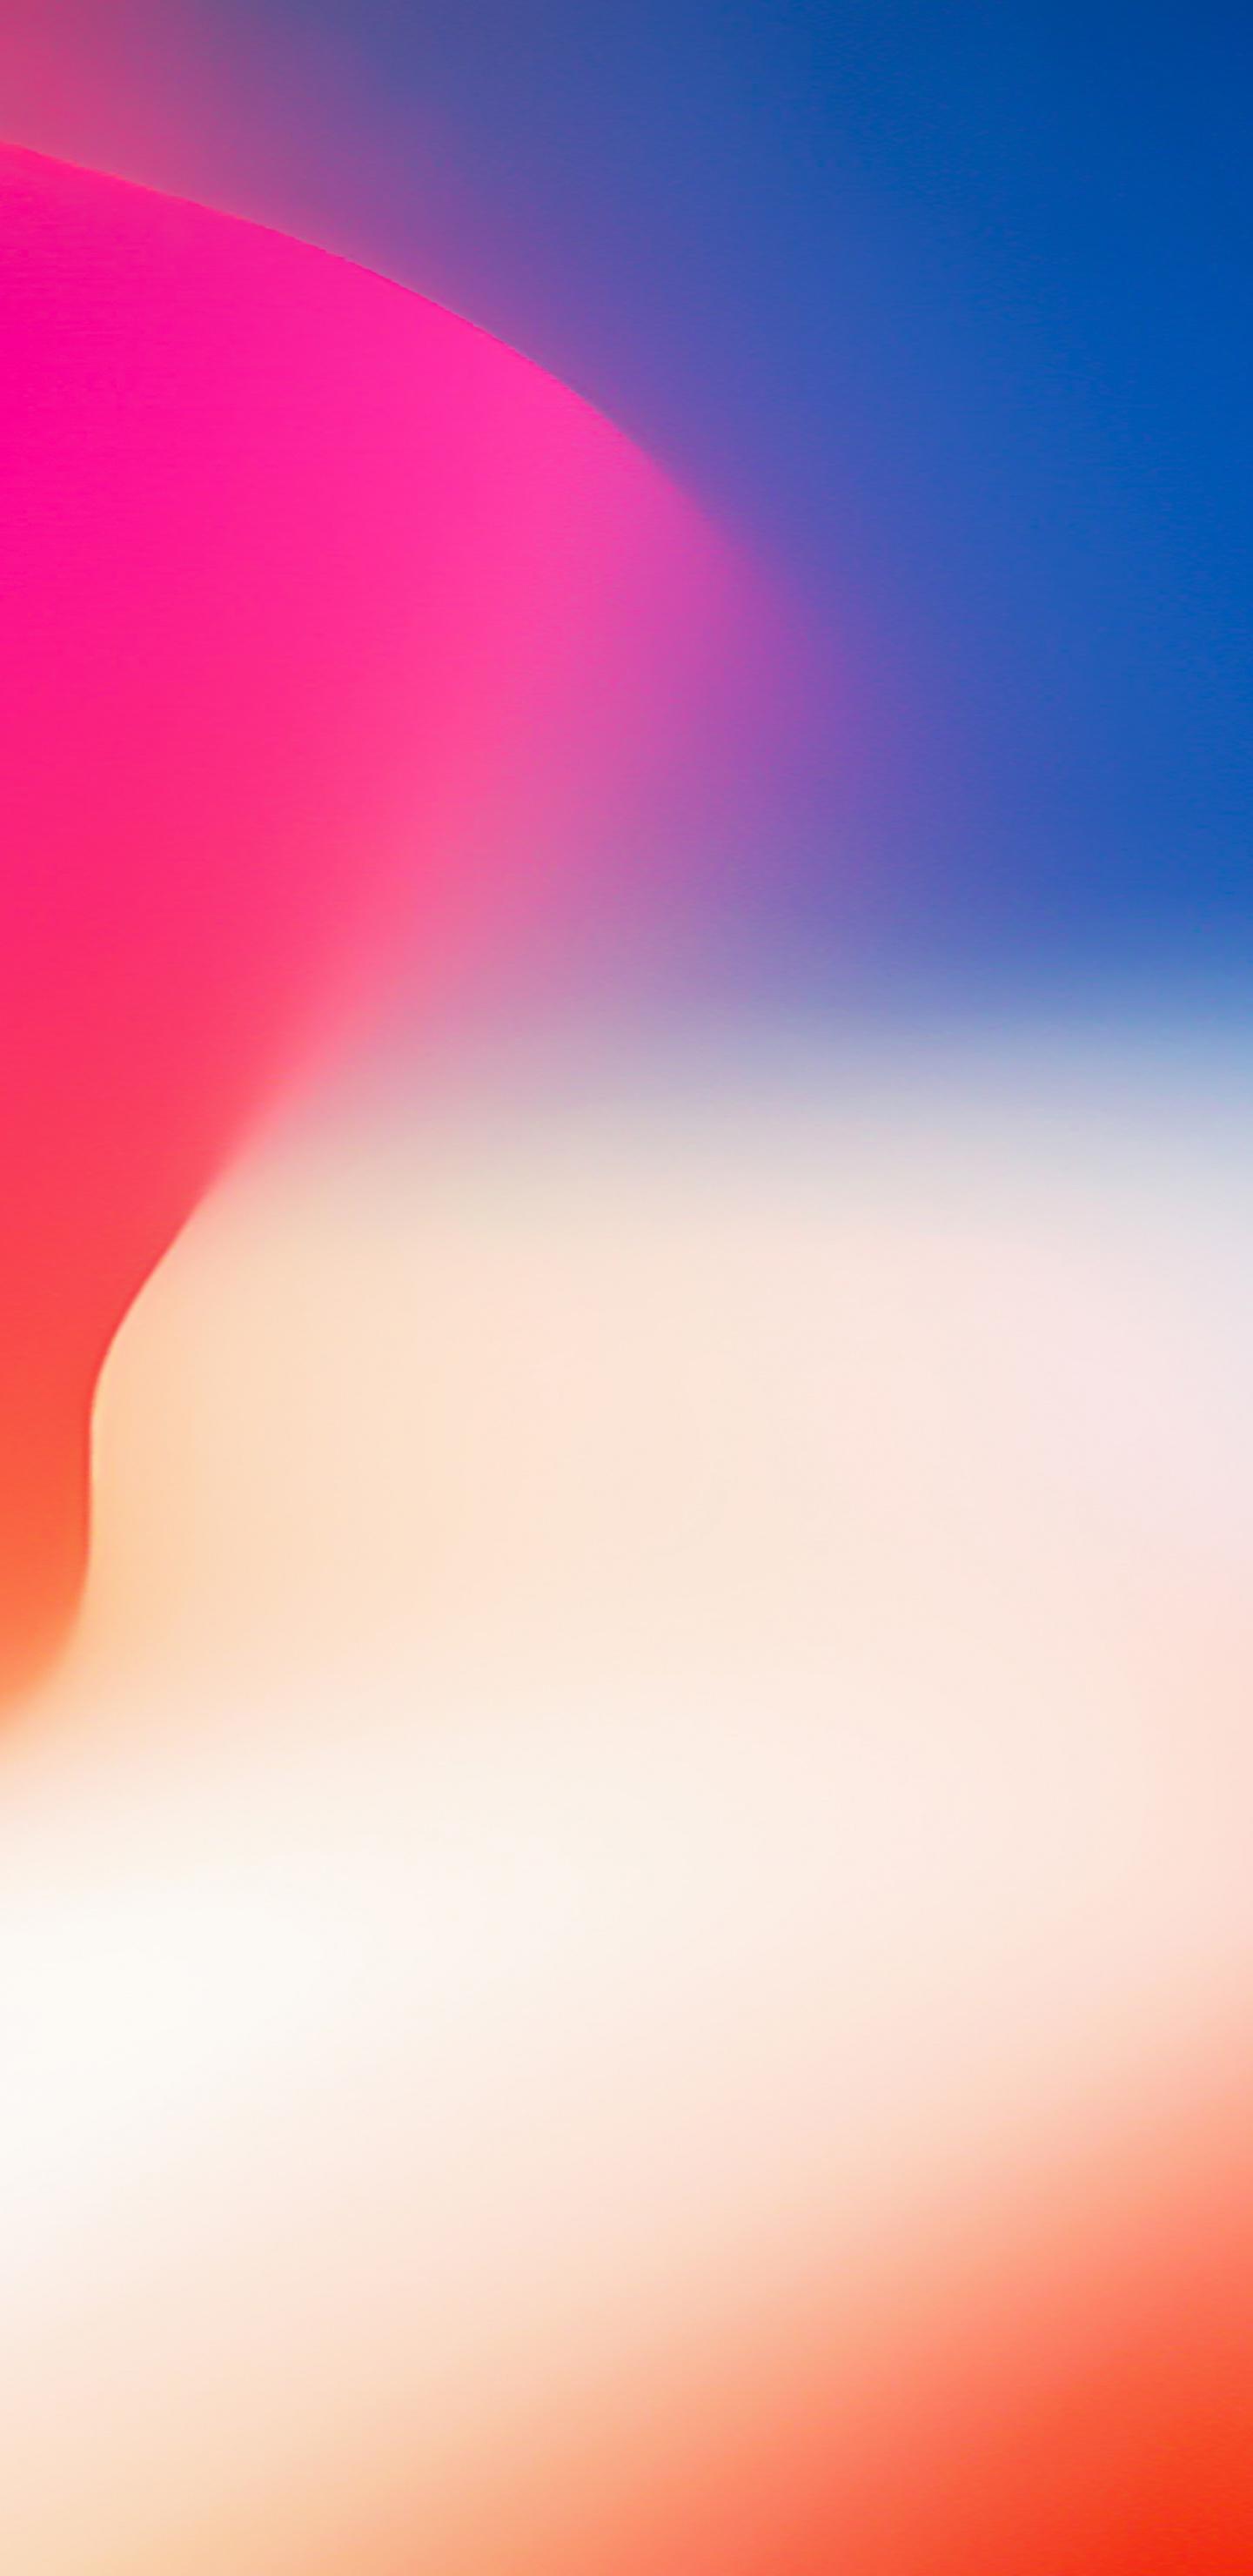 iPhone X, Stock, Colorful Gradient, Abstract, Wallpaper X